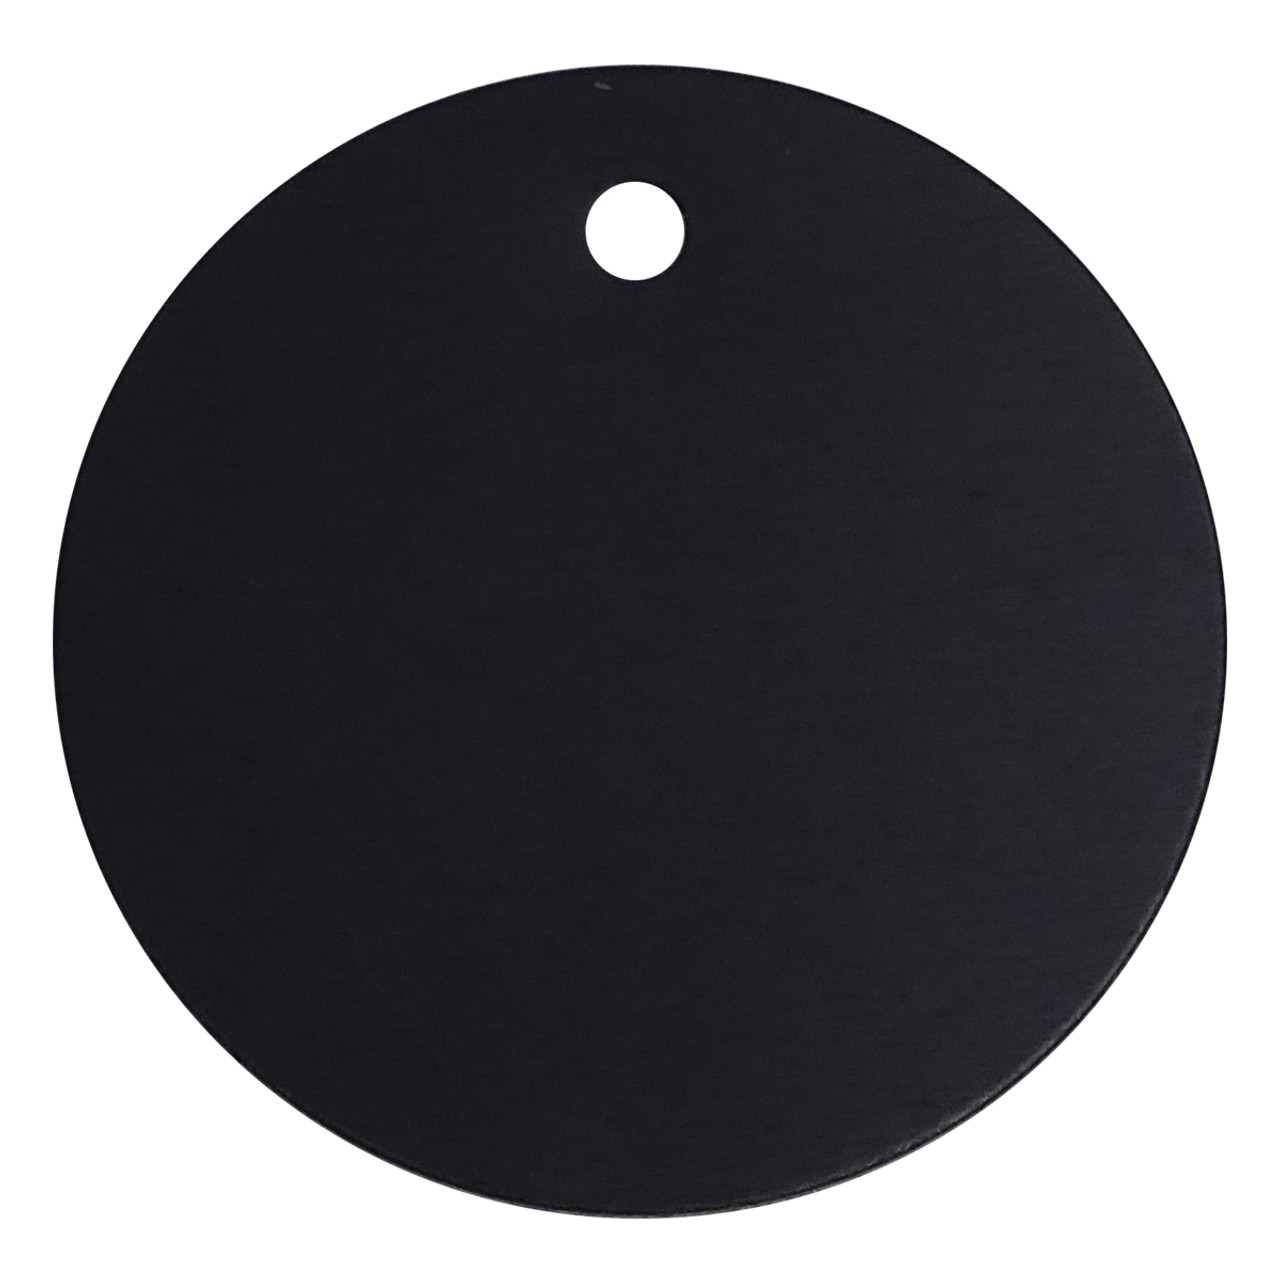 Circle Tags - Anodized Aluminum - Blank